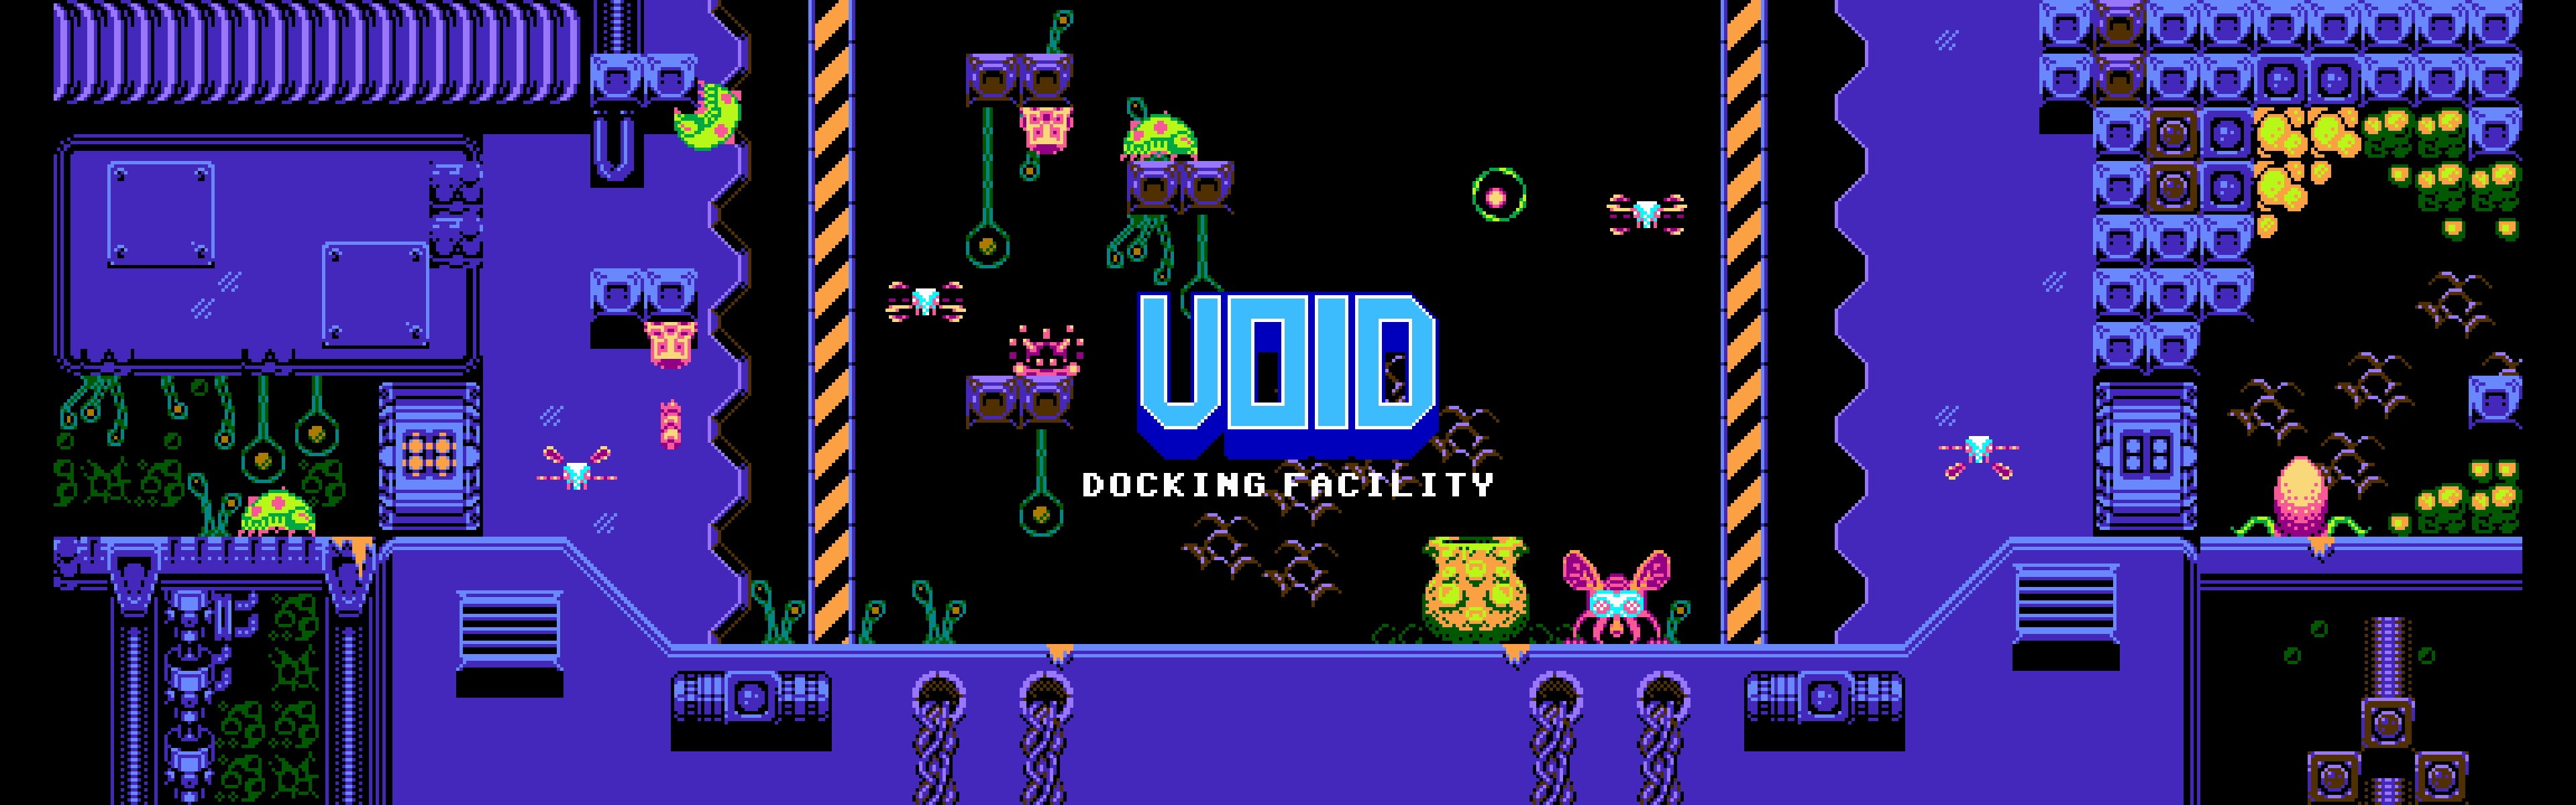 Void Asset Pack: Docking Facility